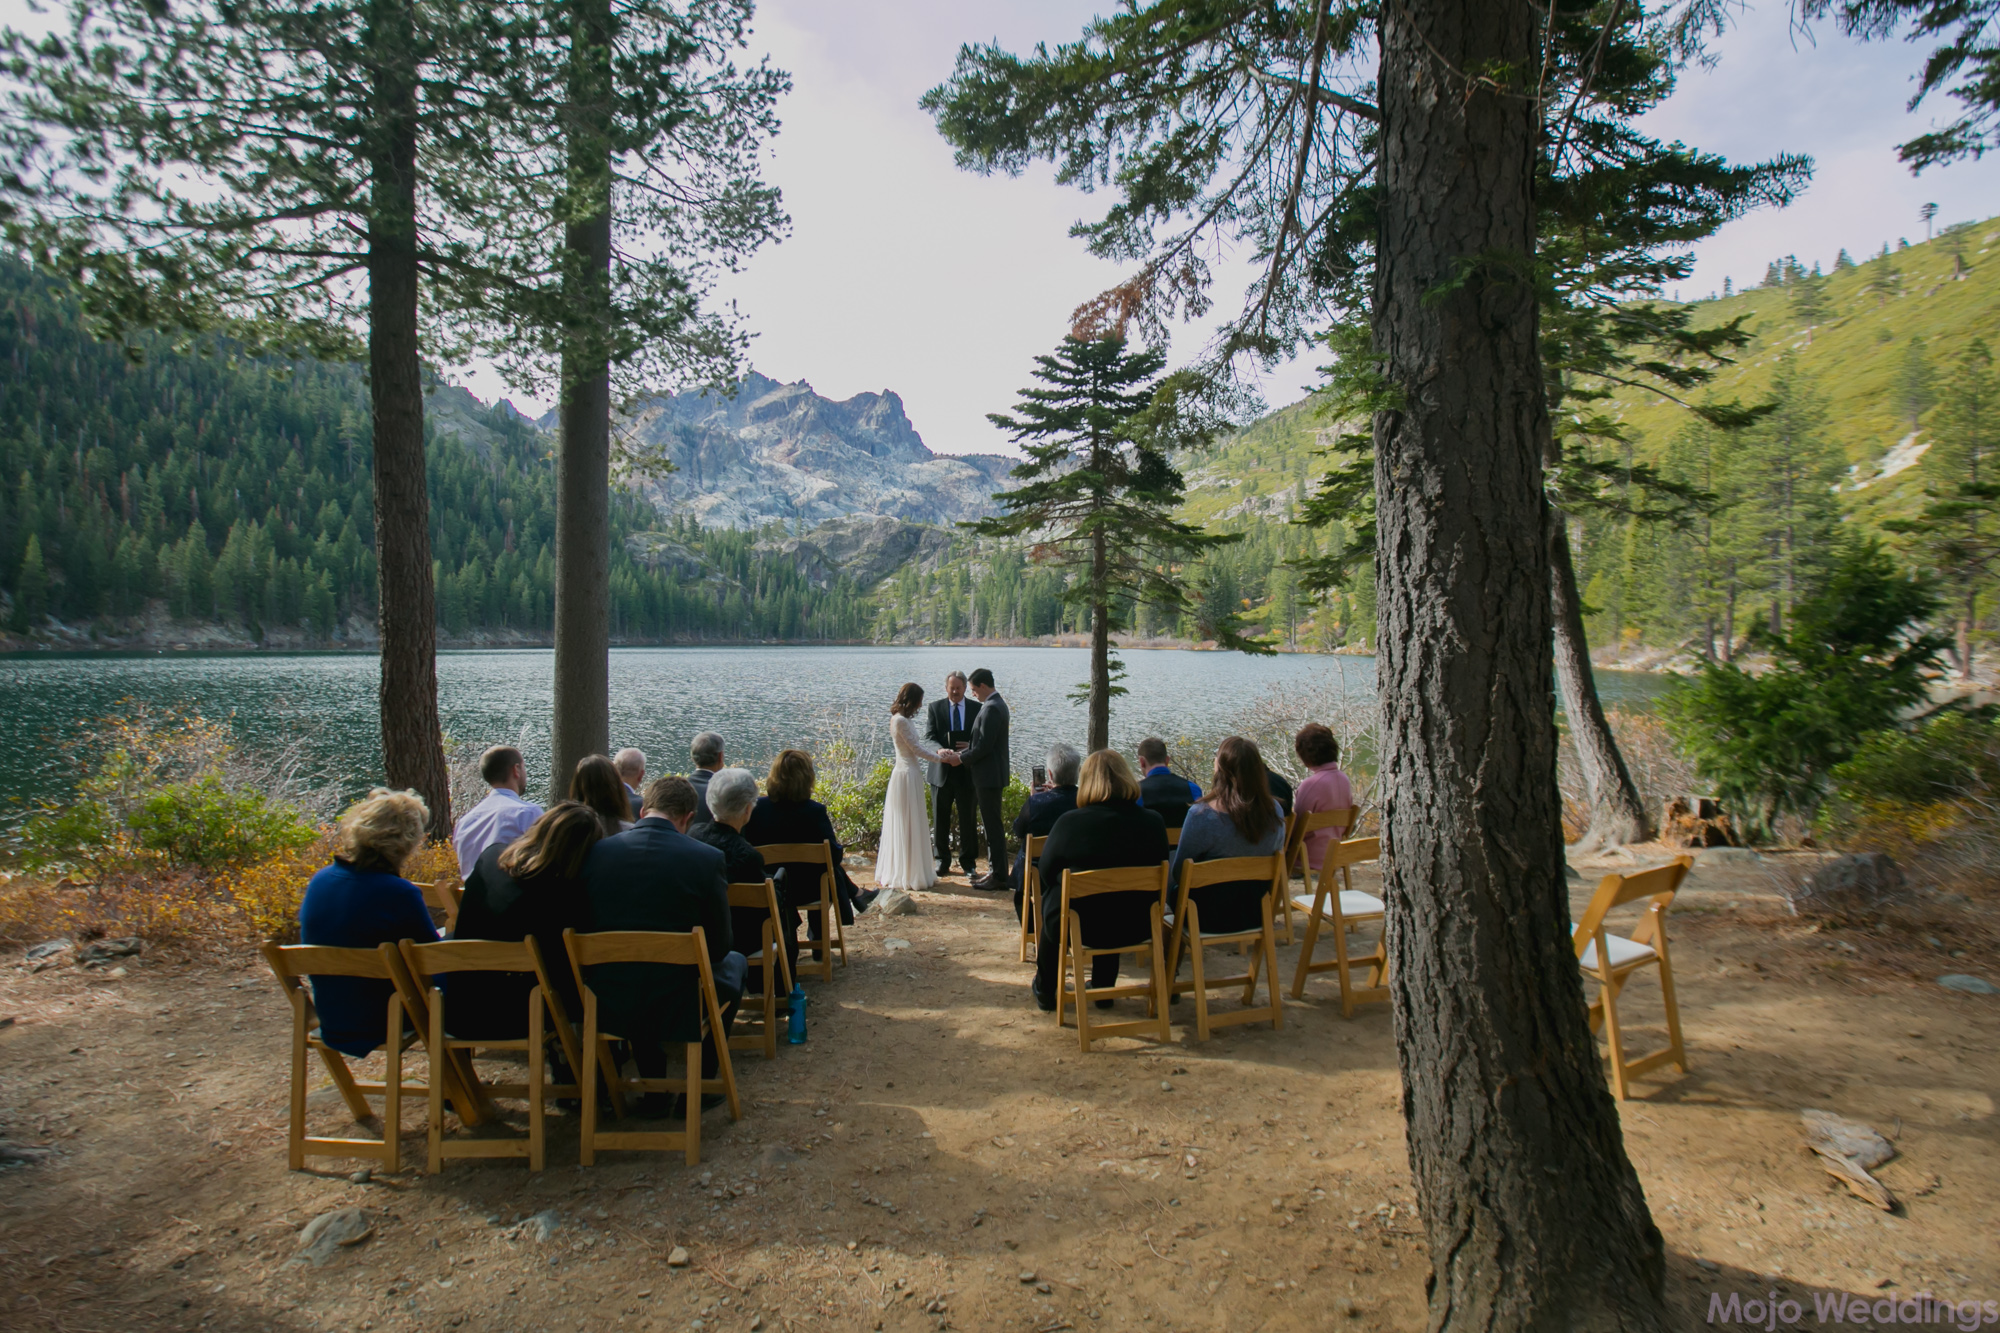 Guests are seated as the wedding ceremony takes place in front of the lake.